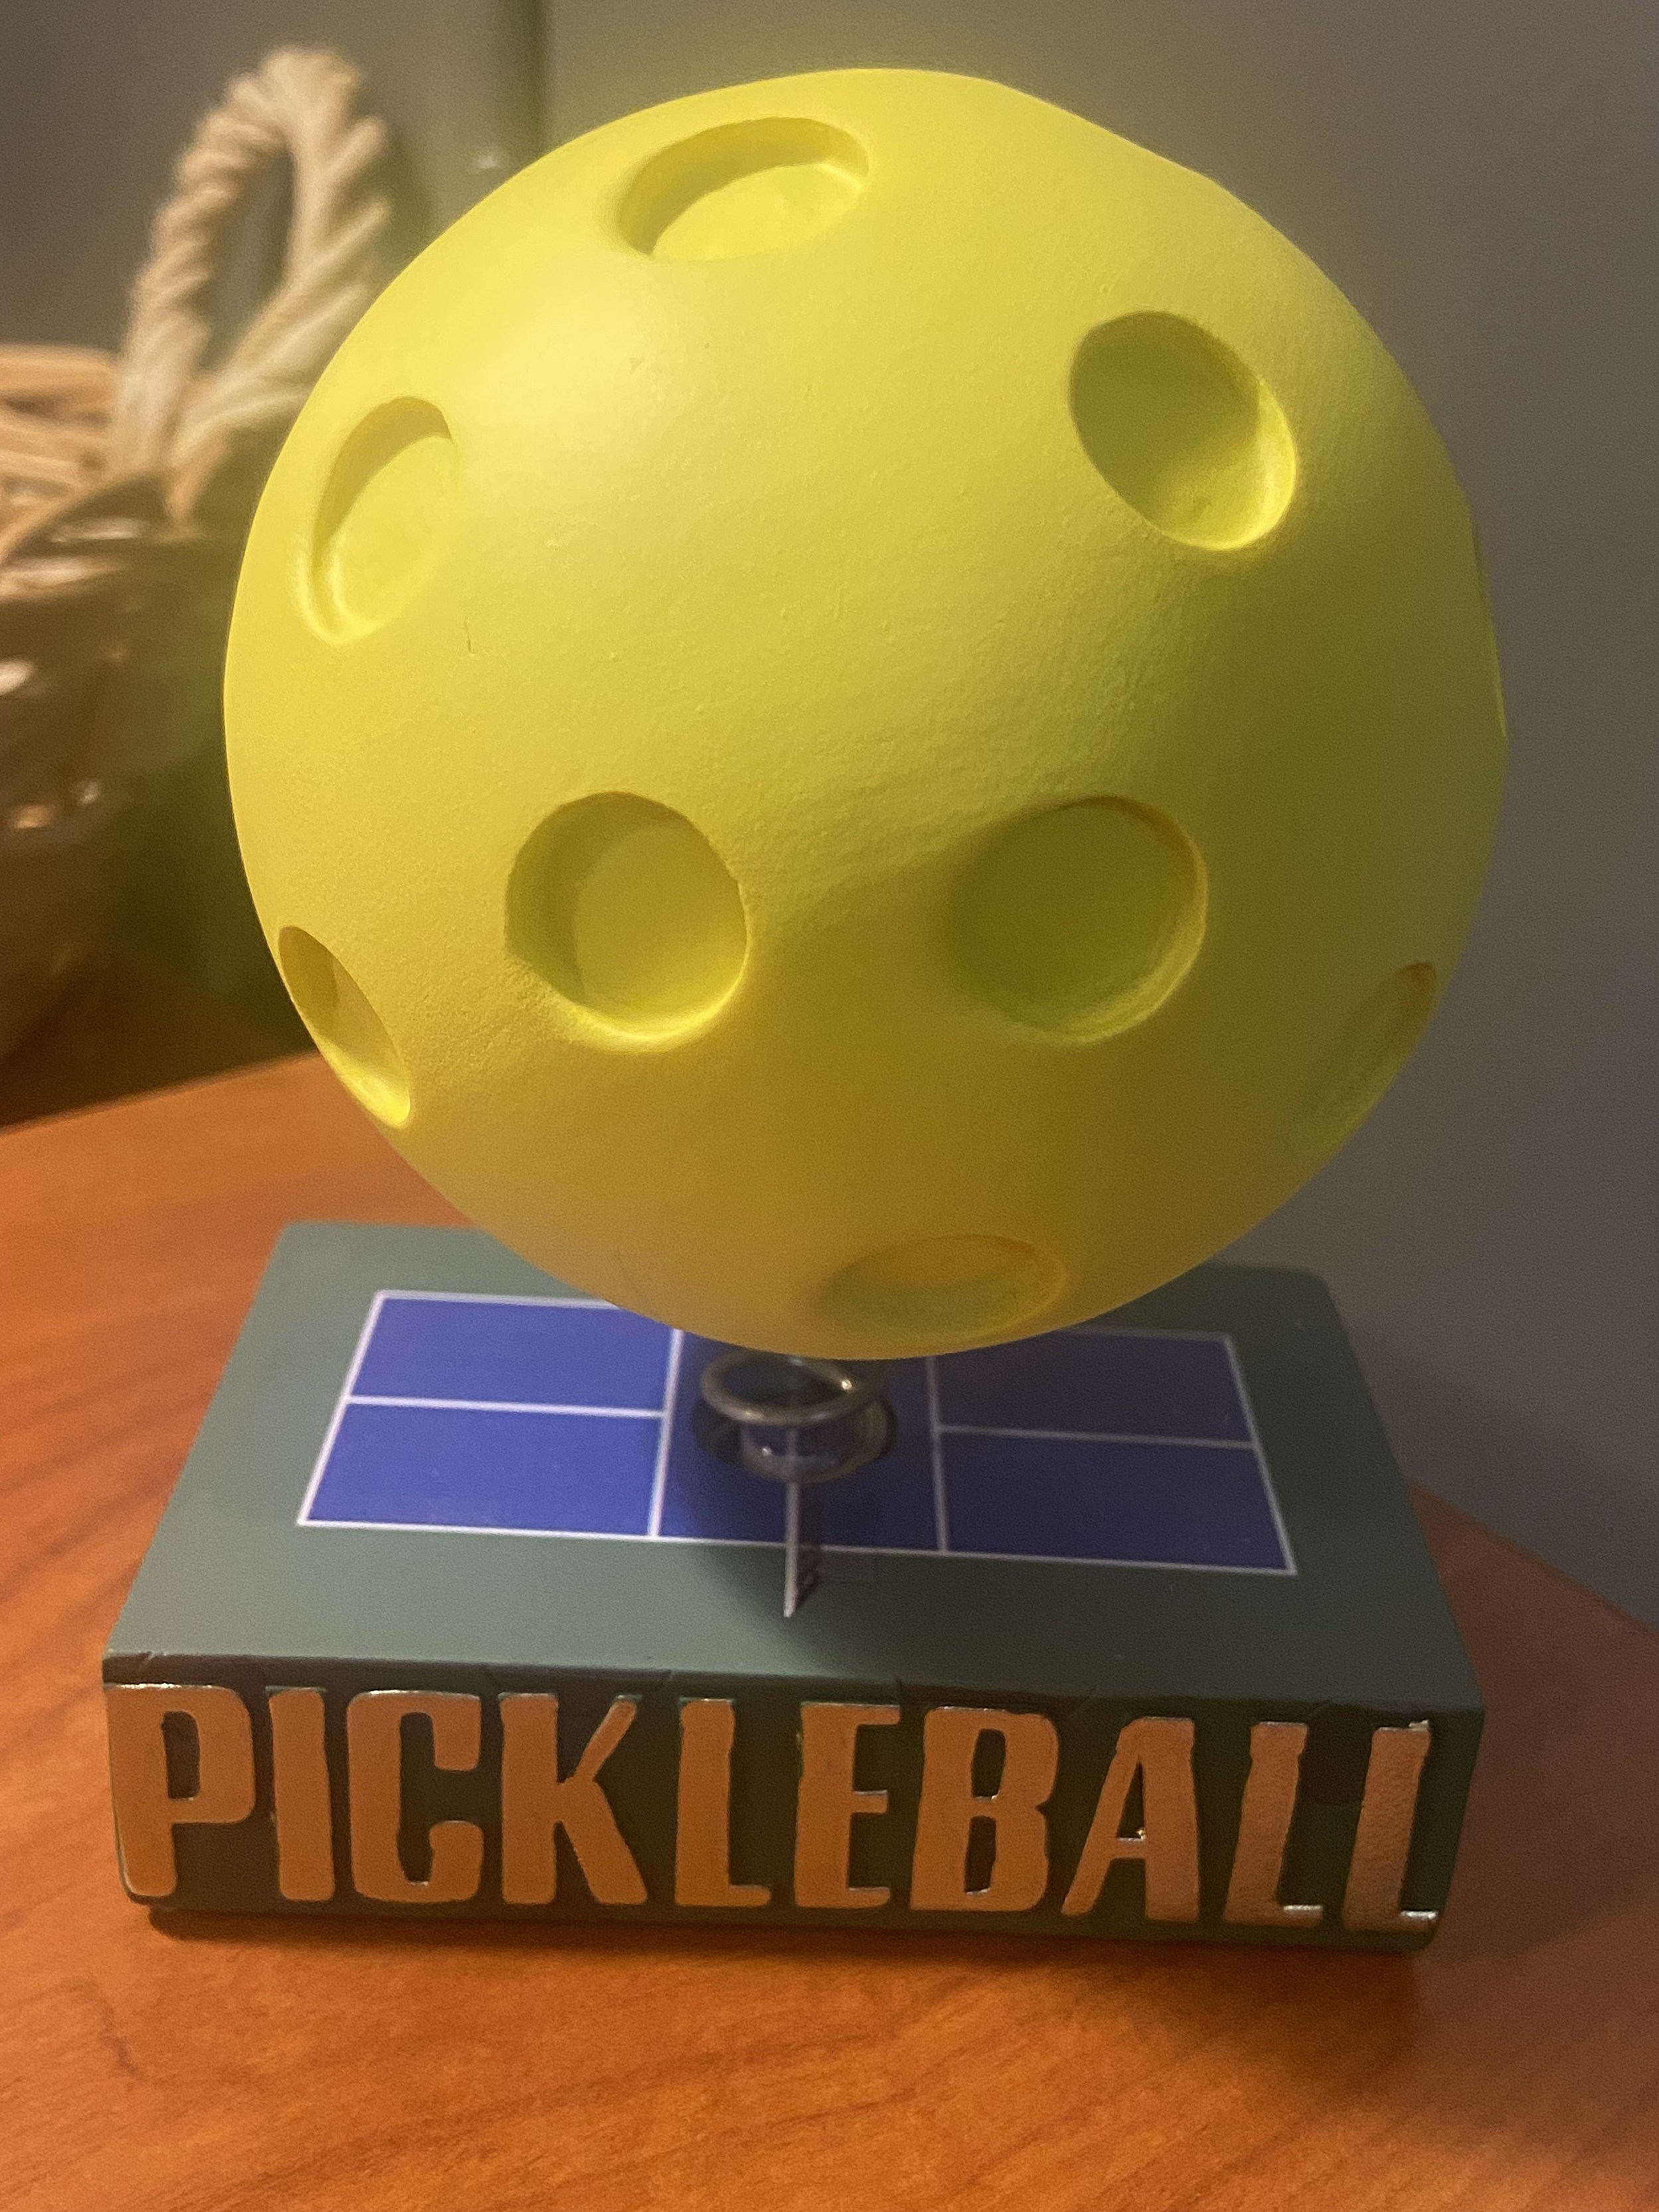 First Pickleball Bobbleheads Unveiled on National Pickleball Day